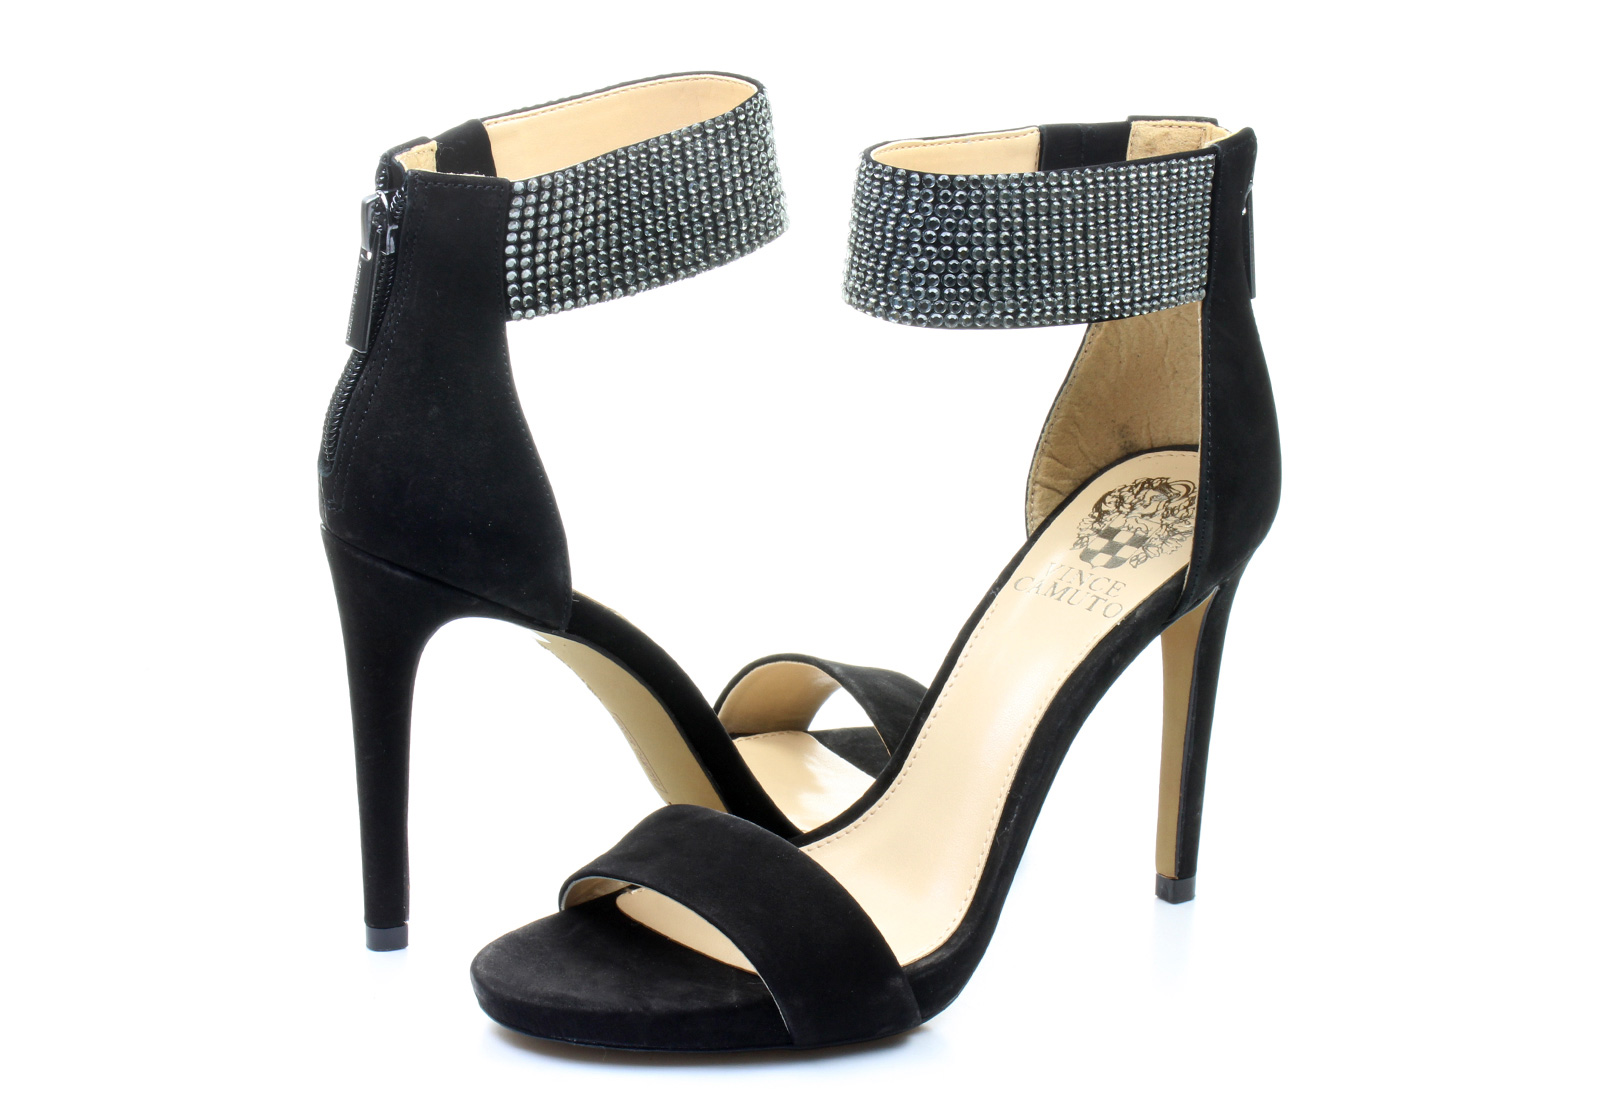 Vince Camuto High Heels - www.inf-inet.com